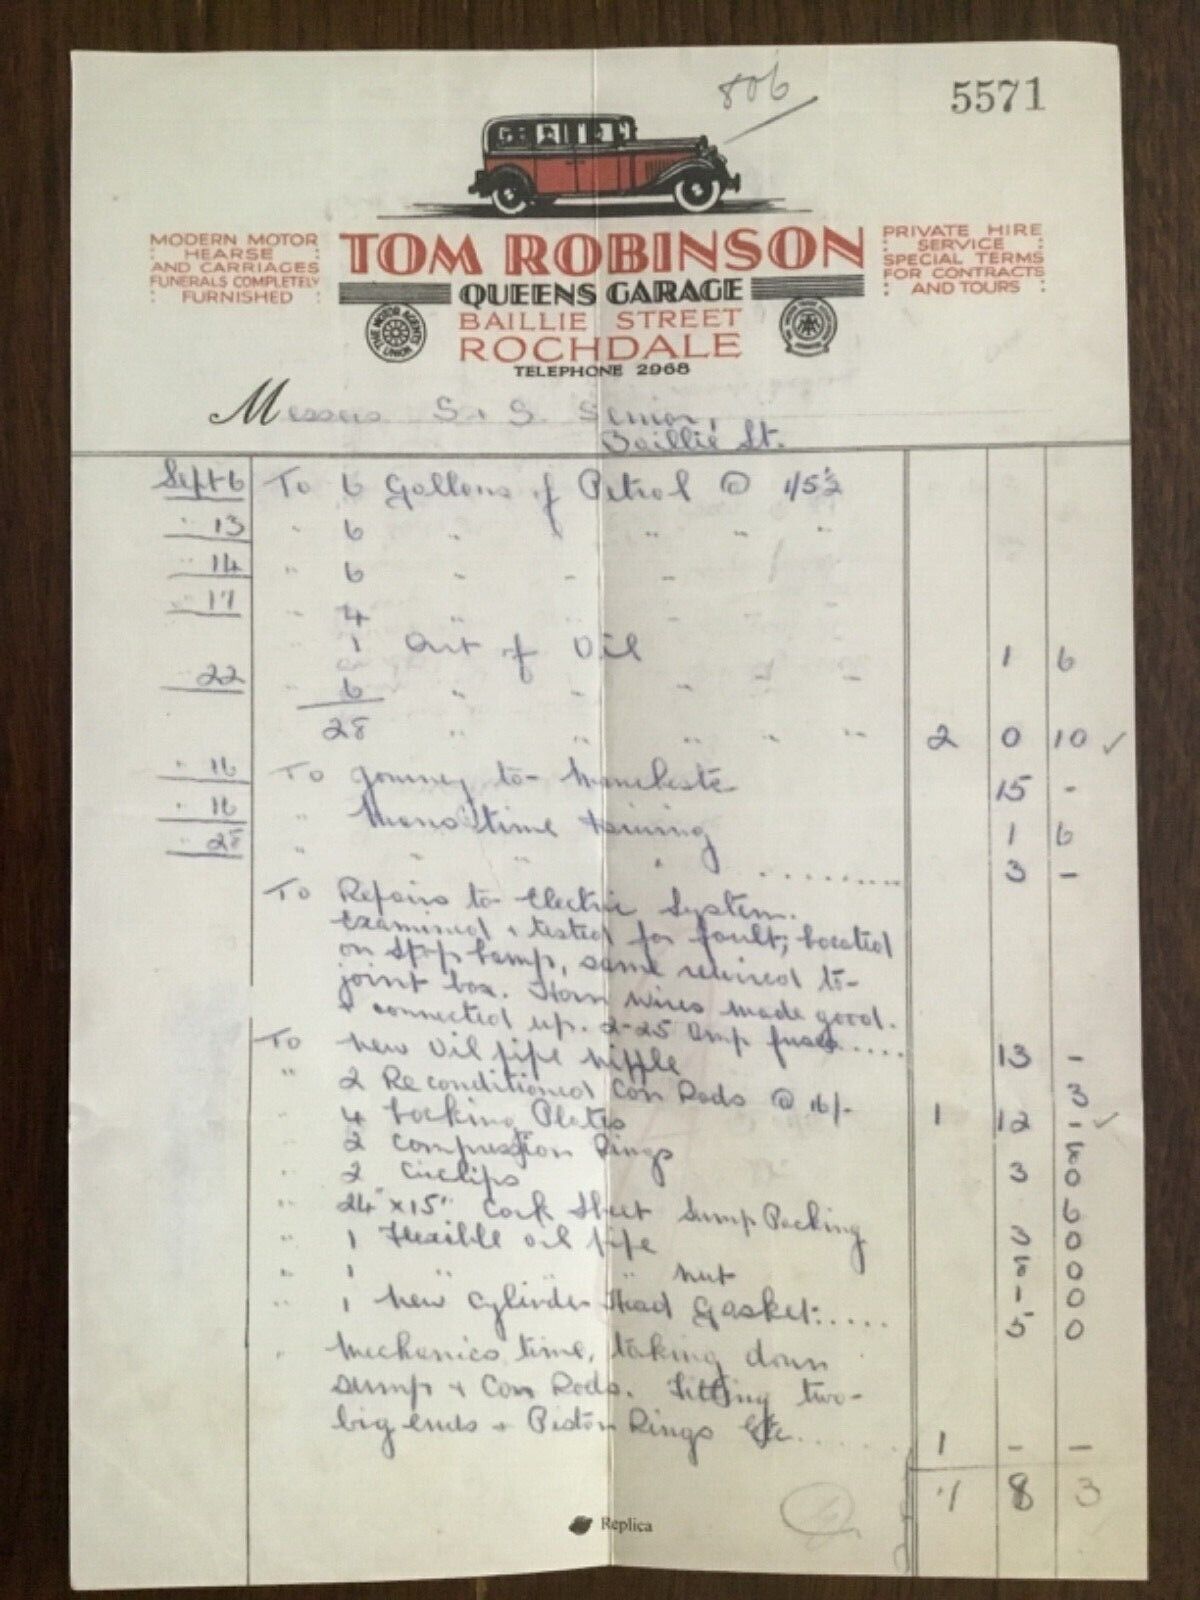 OLD STYLE CAR REPAIR INVOICE ***(((Reproduction of the original)))***